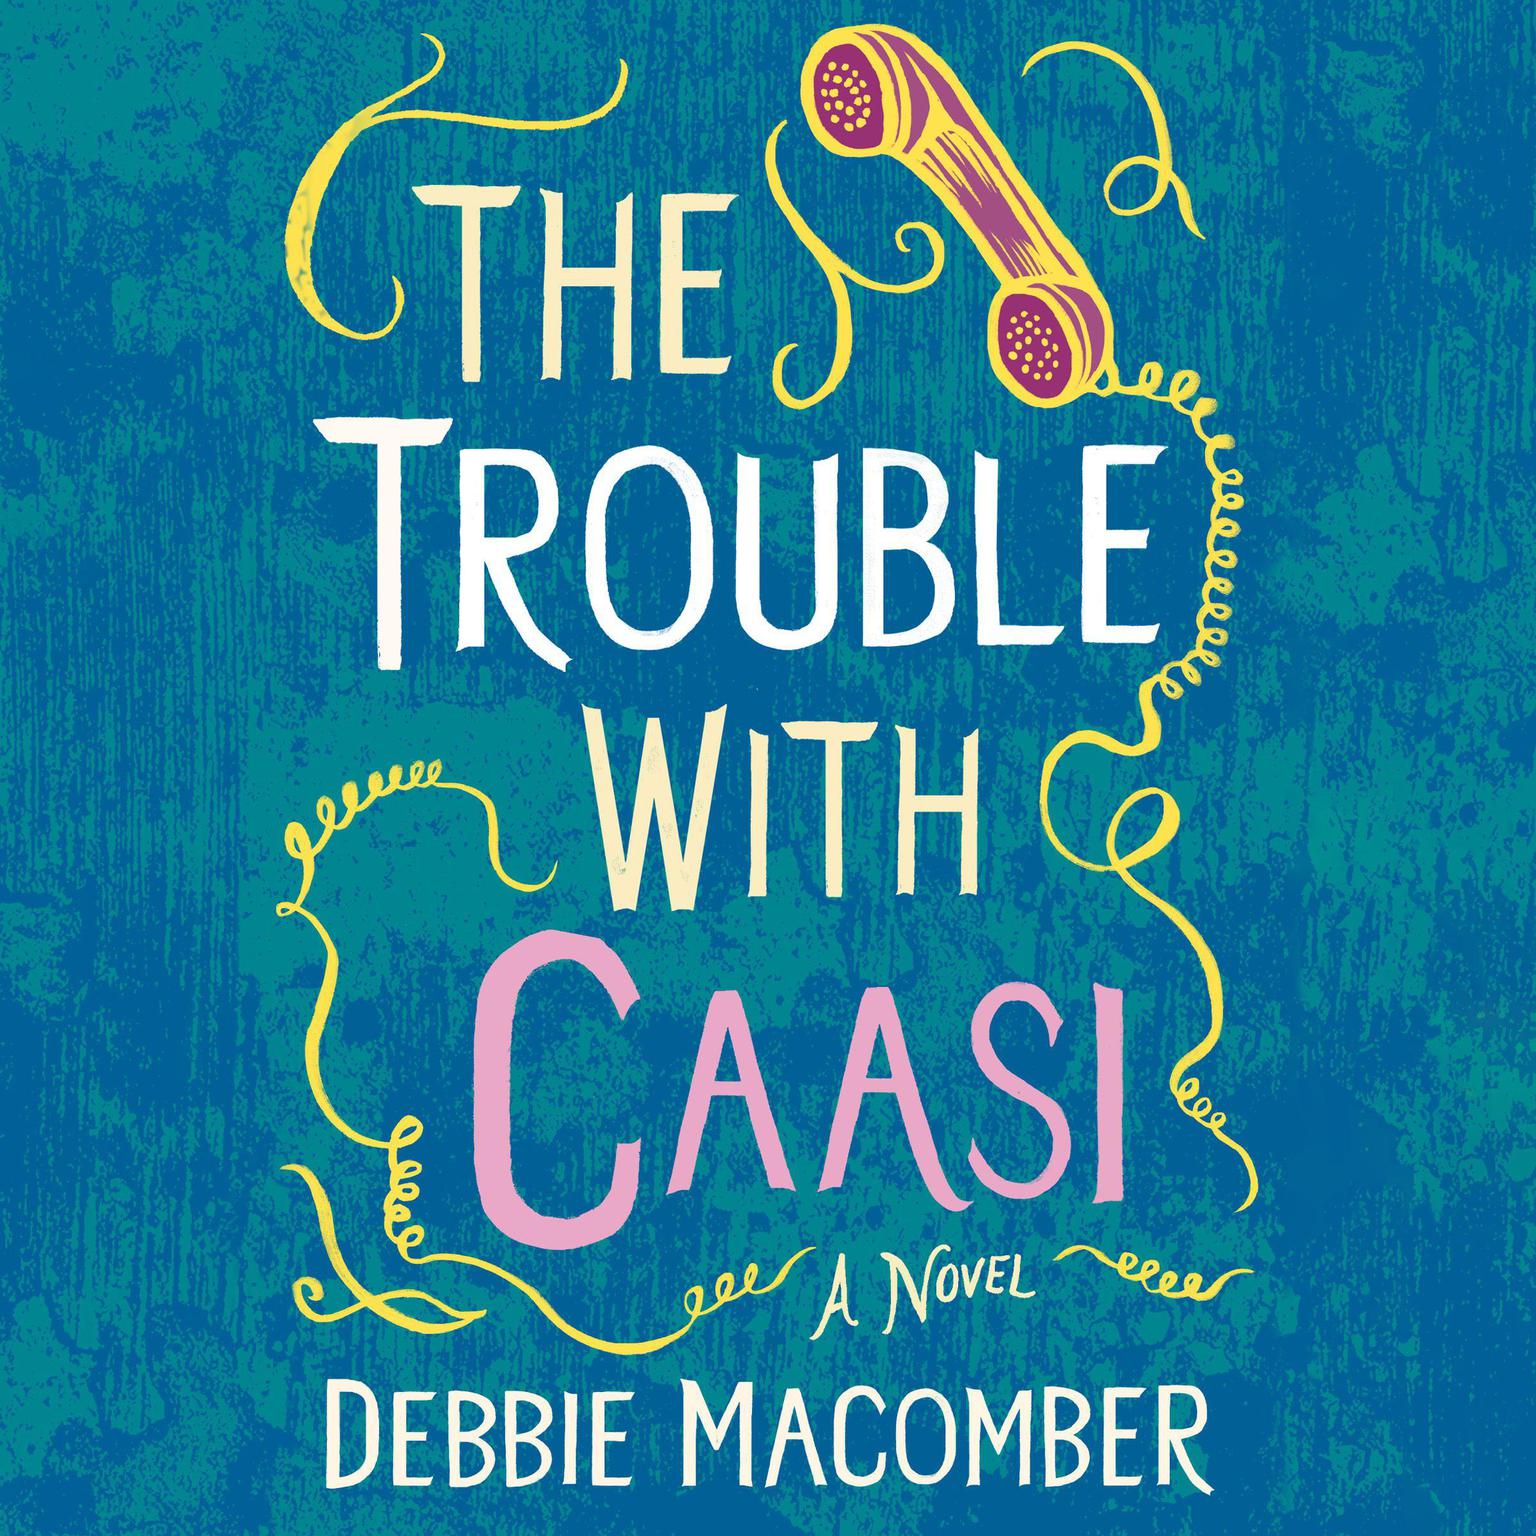 The Trouble with Caasi: A Novel Audiobook, by Debbie Macomber